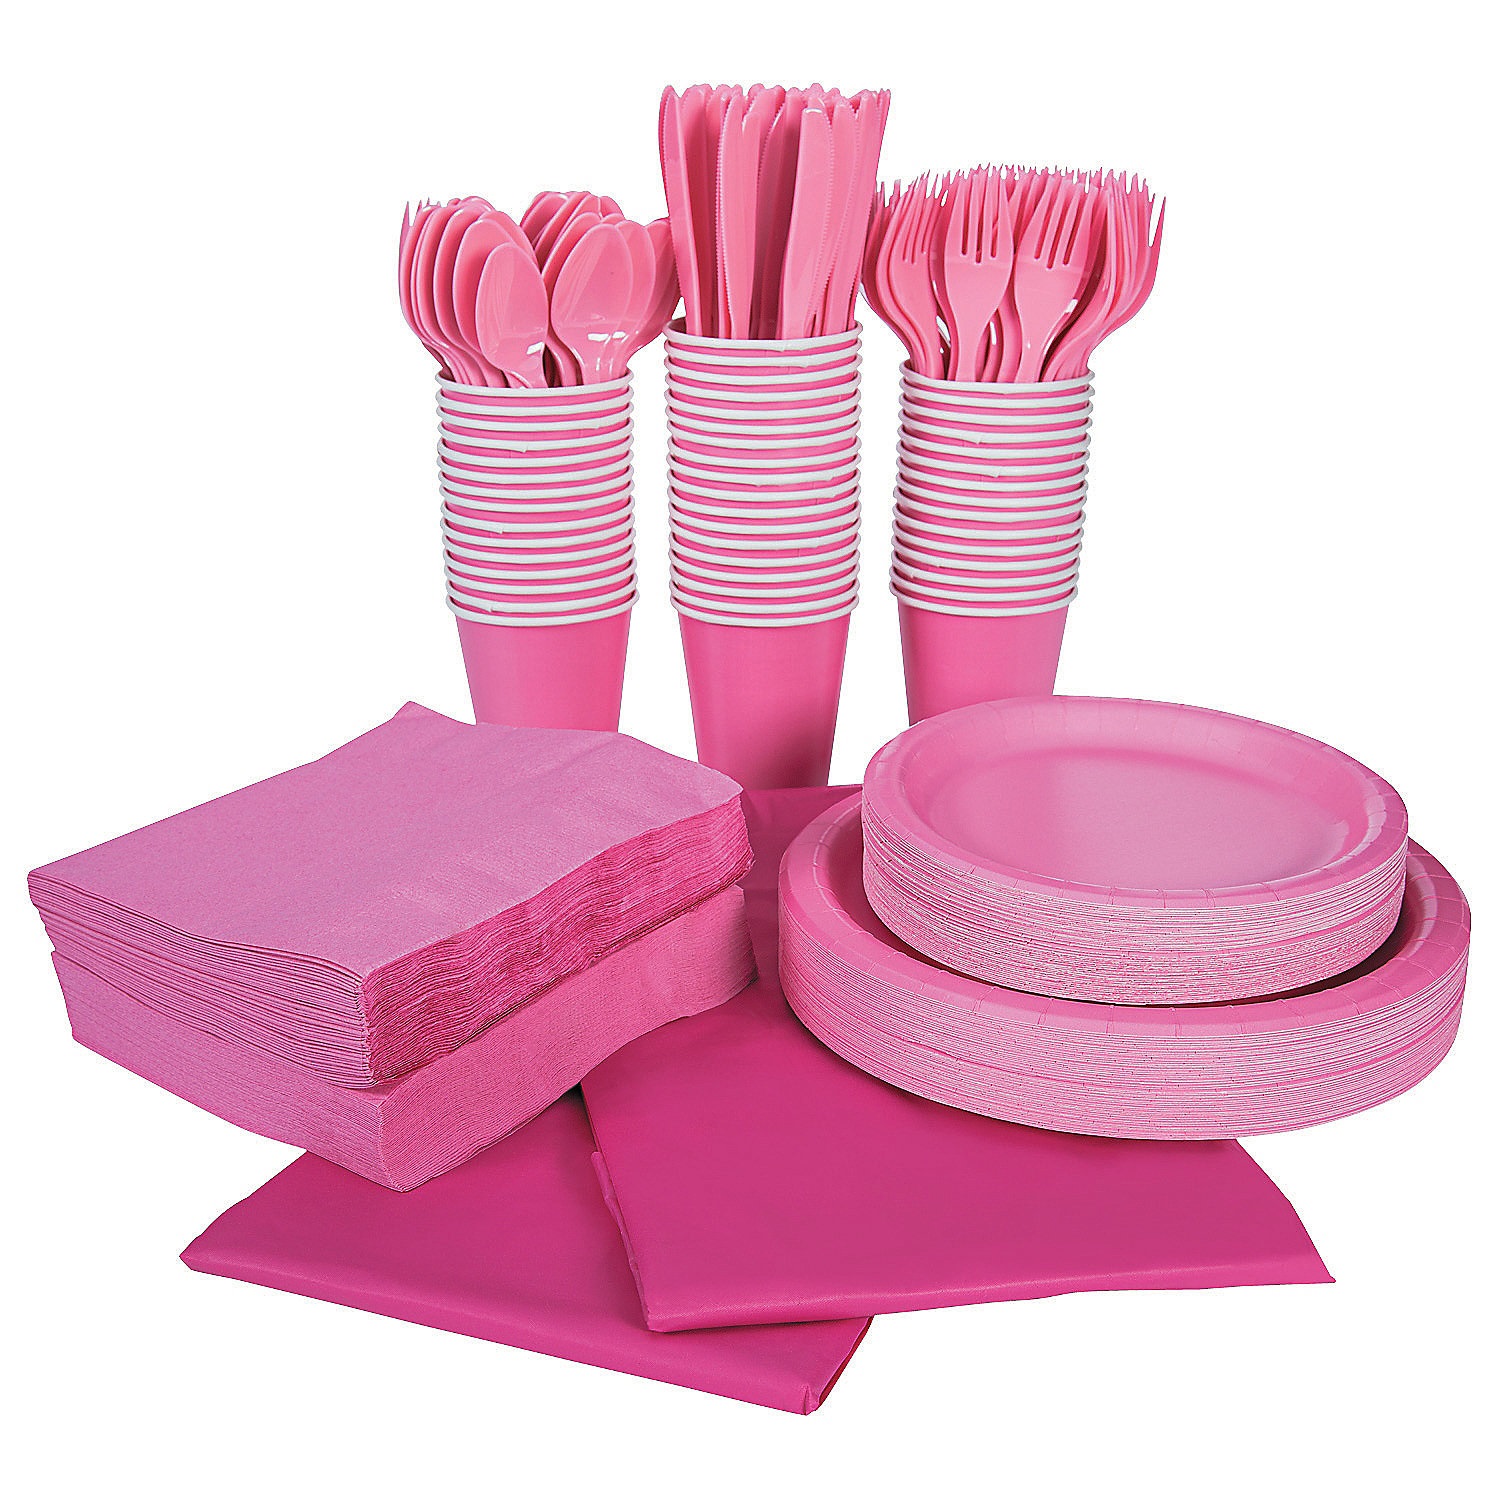 candy-pink-tableware-kit-for-48-guests_13805801